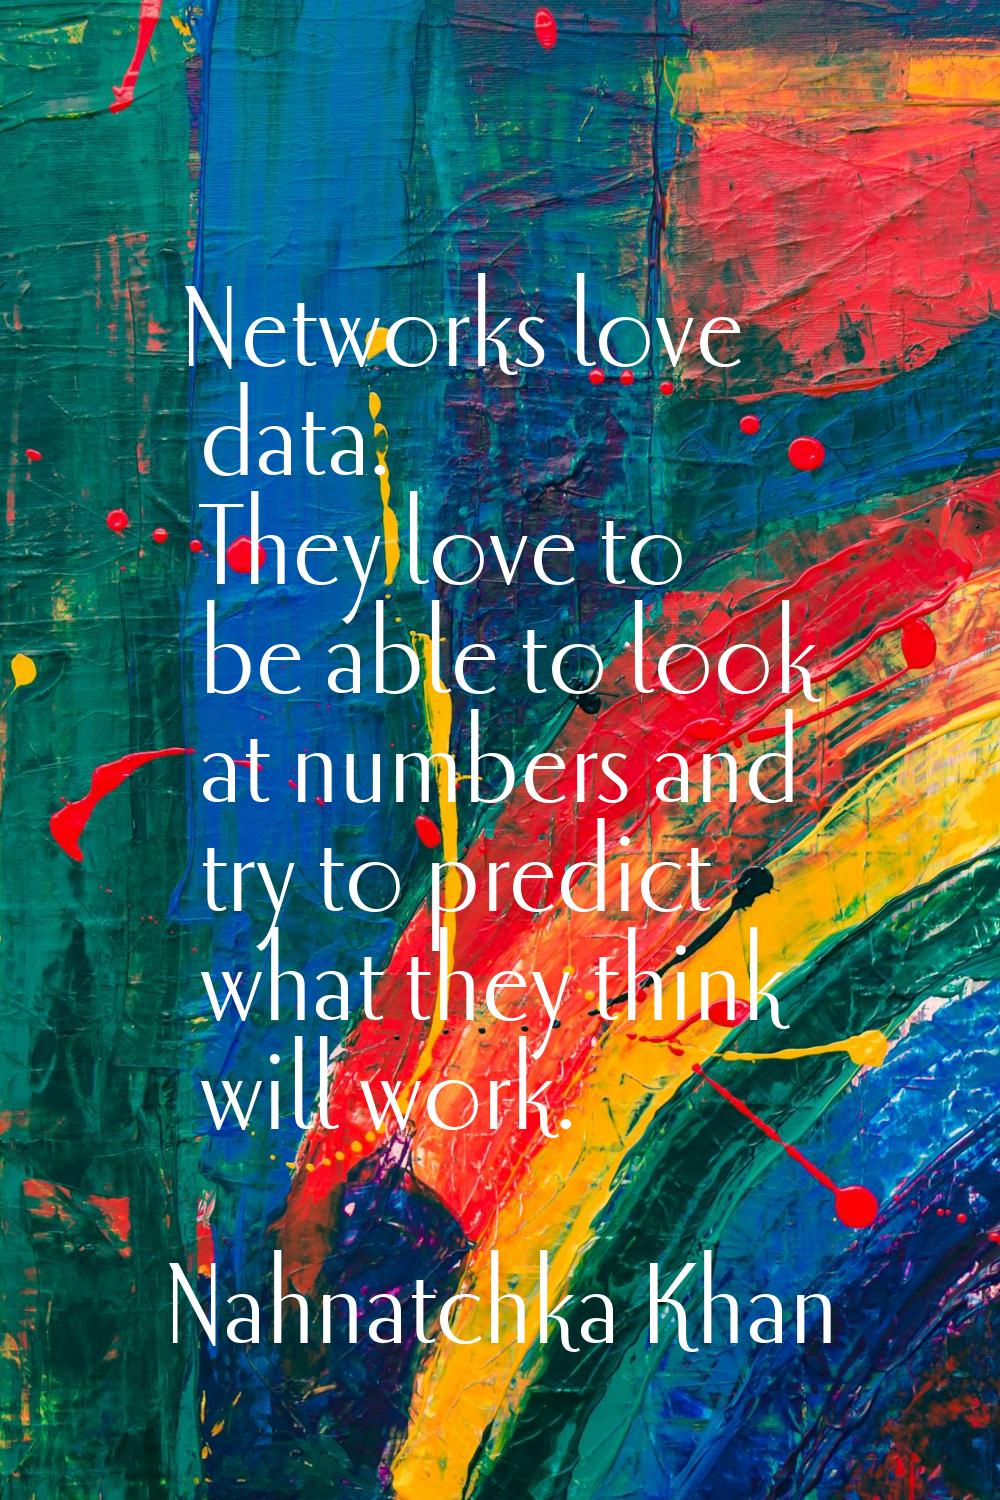 Networks love data. They love to be able to look at numbers and try to predict what they think will